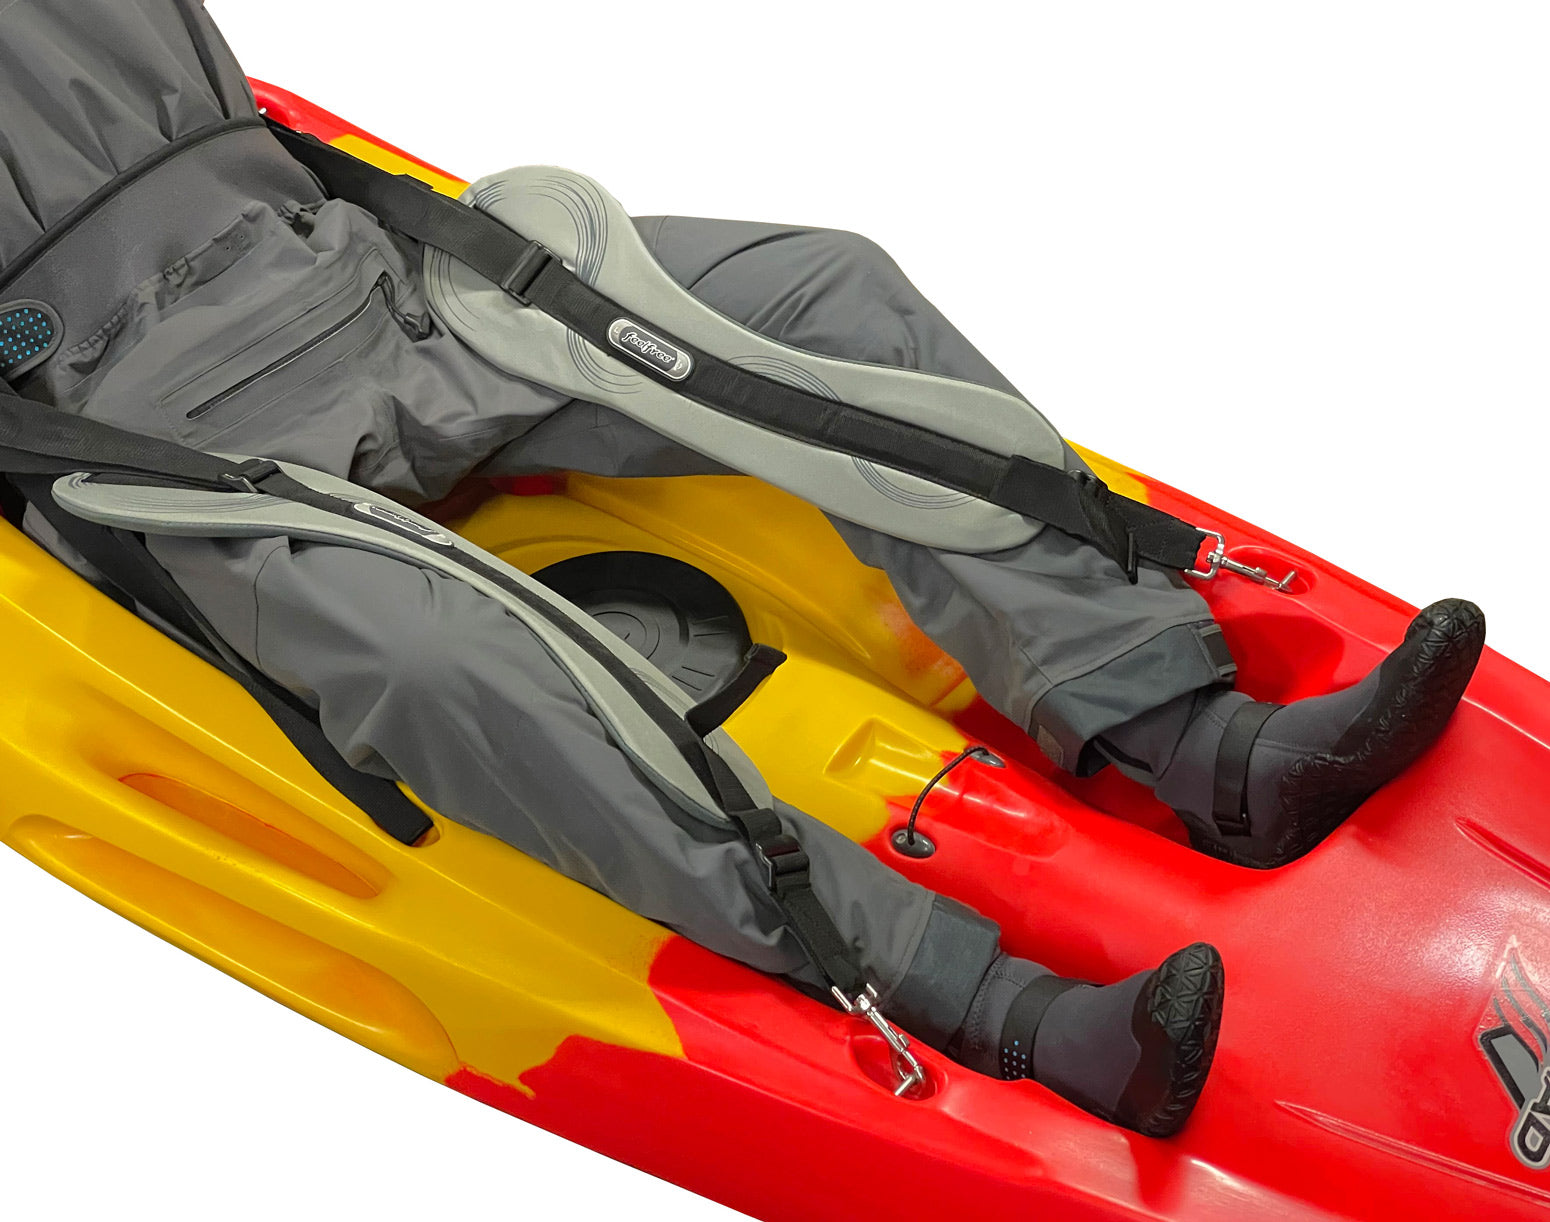 Feelfree Padded Thigh Straps shown in place over a paddler's legs